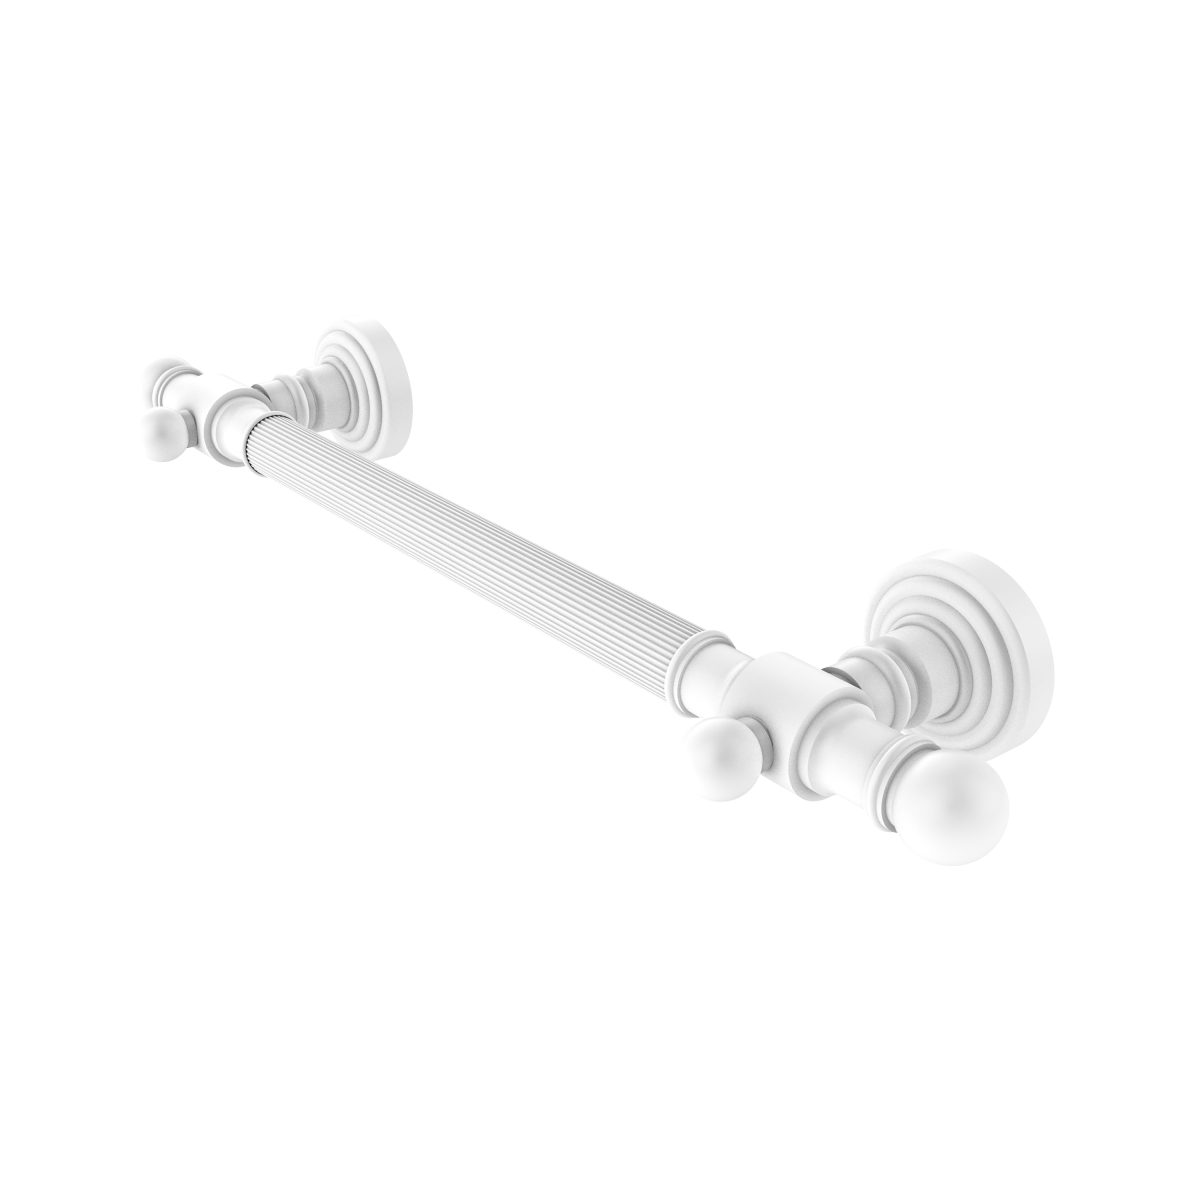 Picture of Allied Brass WP-GRR-32-WHM 32 in. Reeded Grab Bar, Matte White - 3.5 x 38 x 32 in.